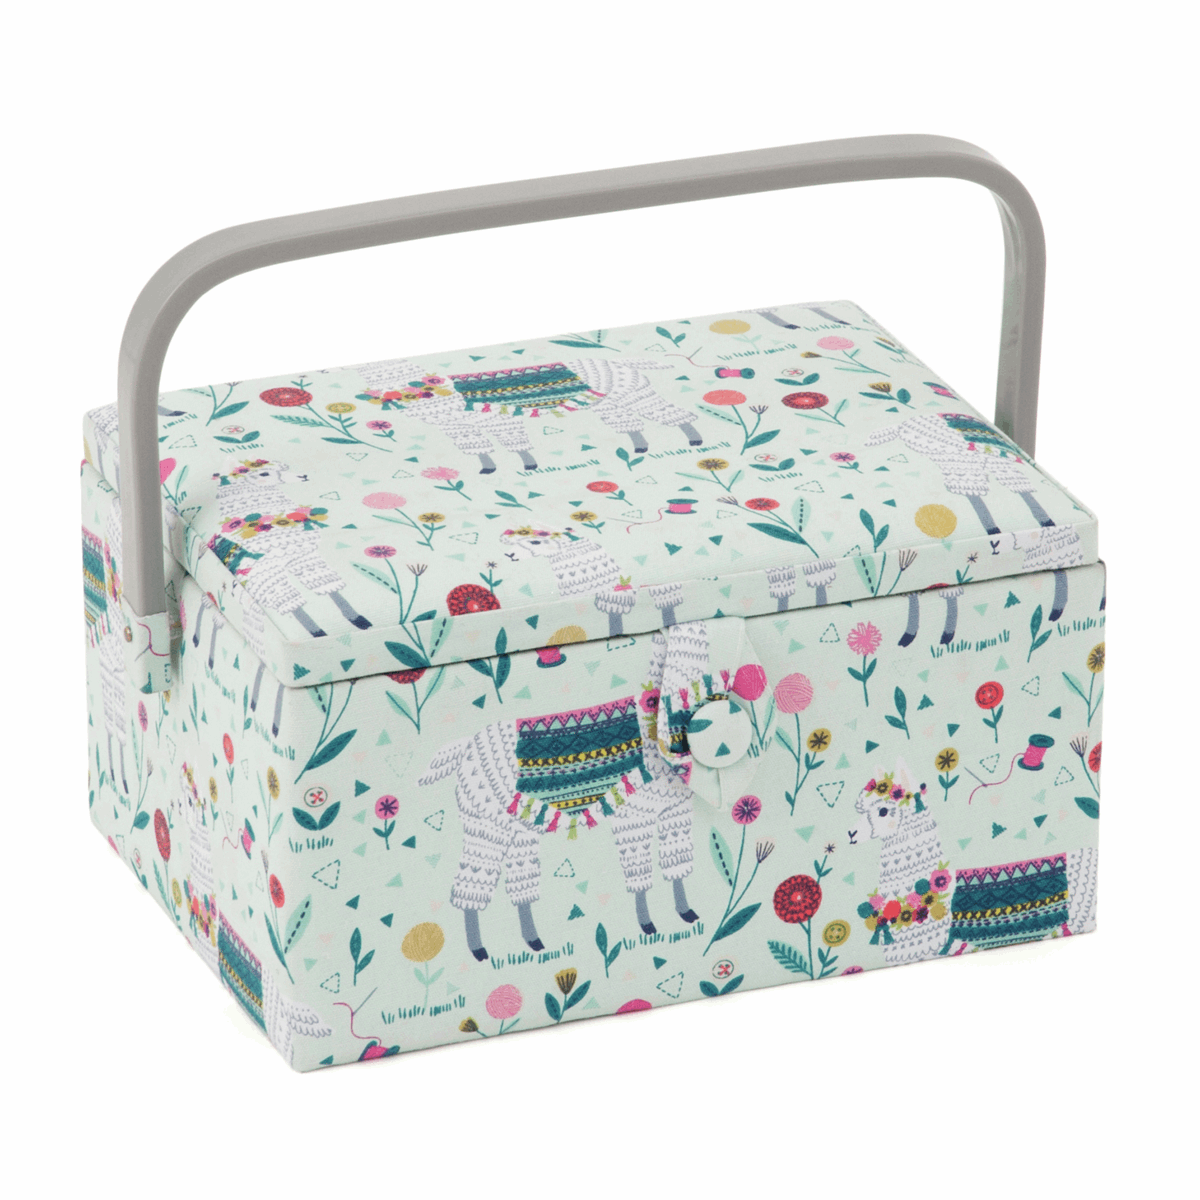 Luxury Llama Sewing Box with Deluxe Craft Kit